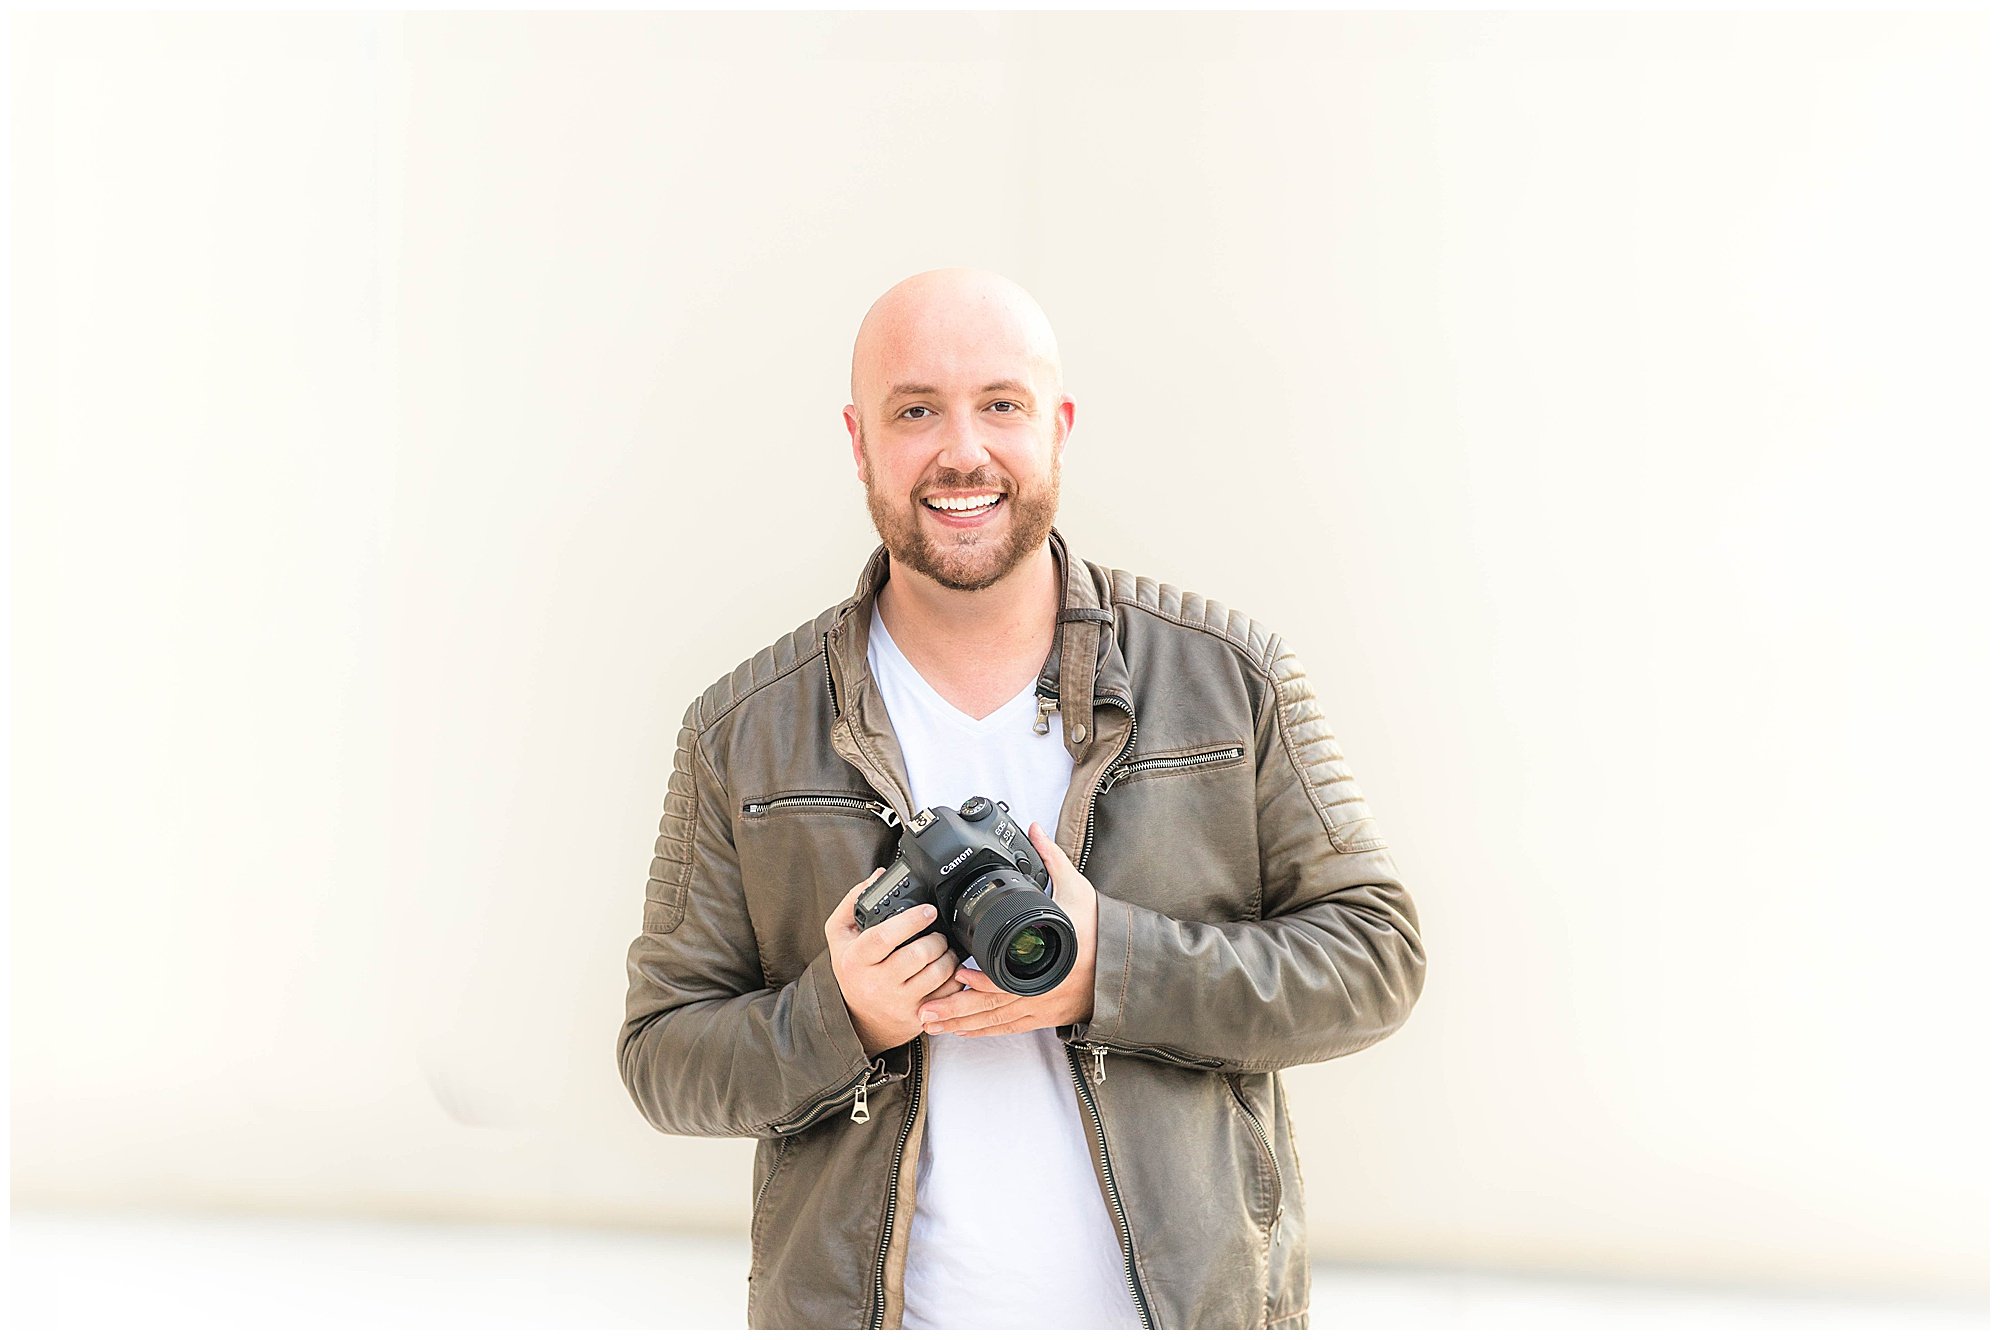 Picture of Fort Worth Wedding Photographer Rob Greene, owner of Square 8 Studio.